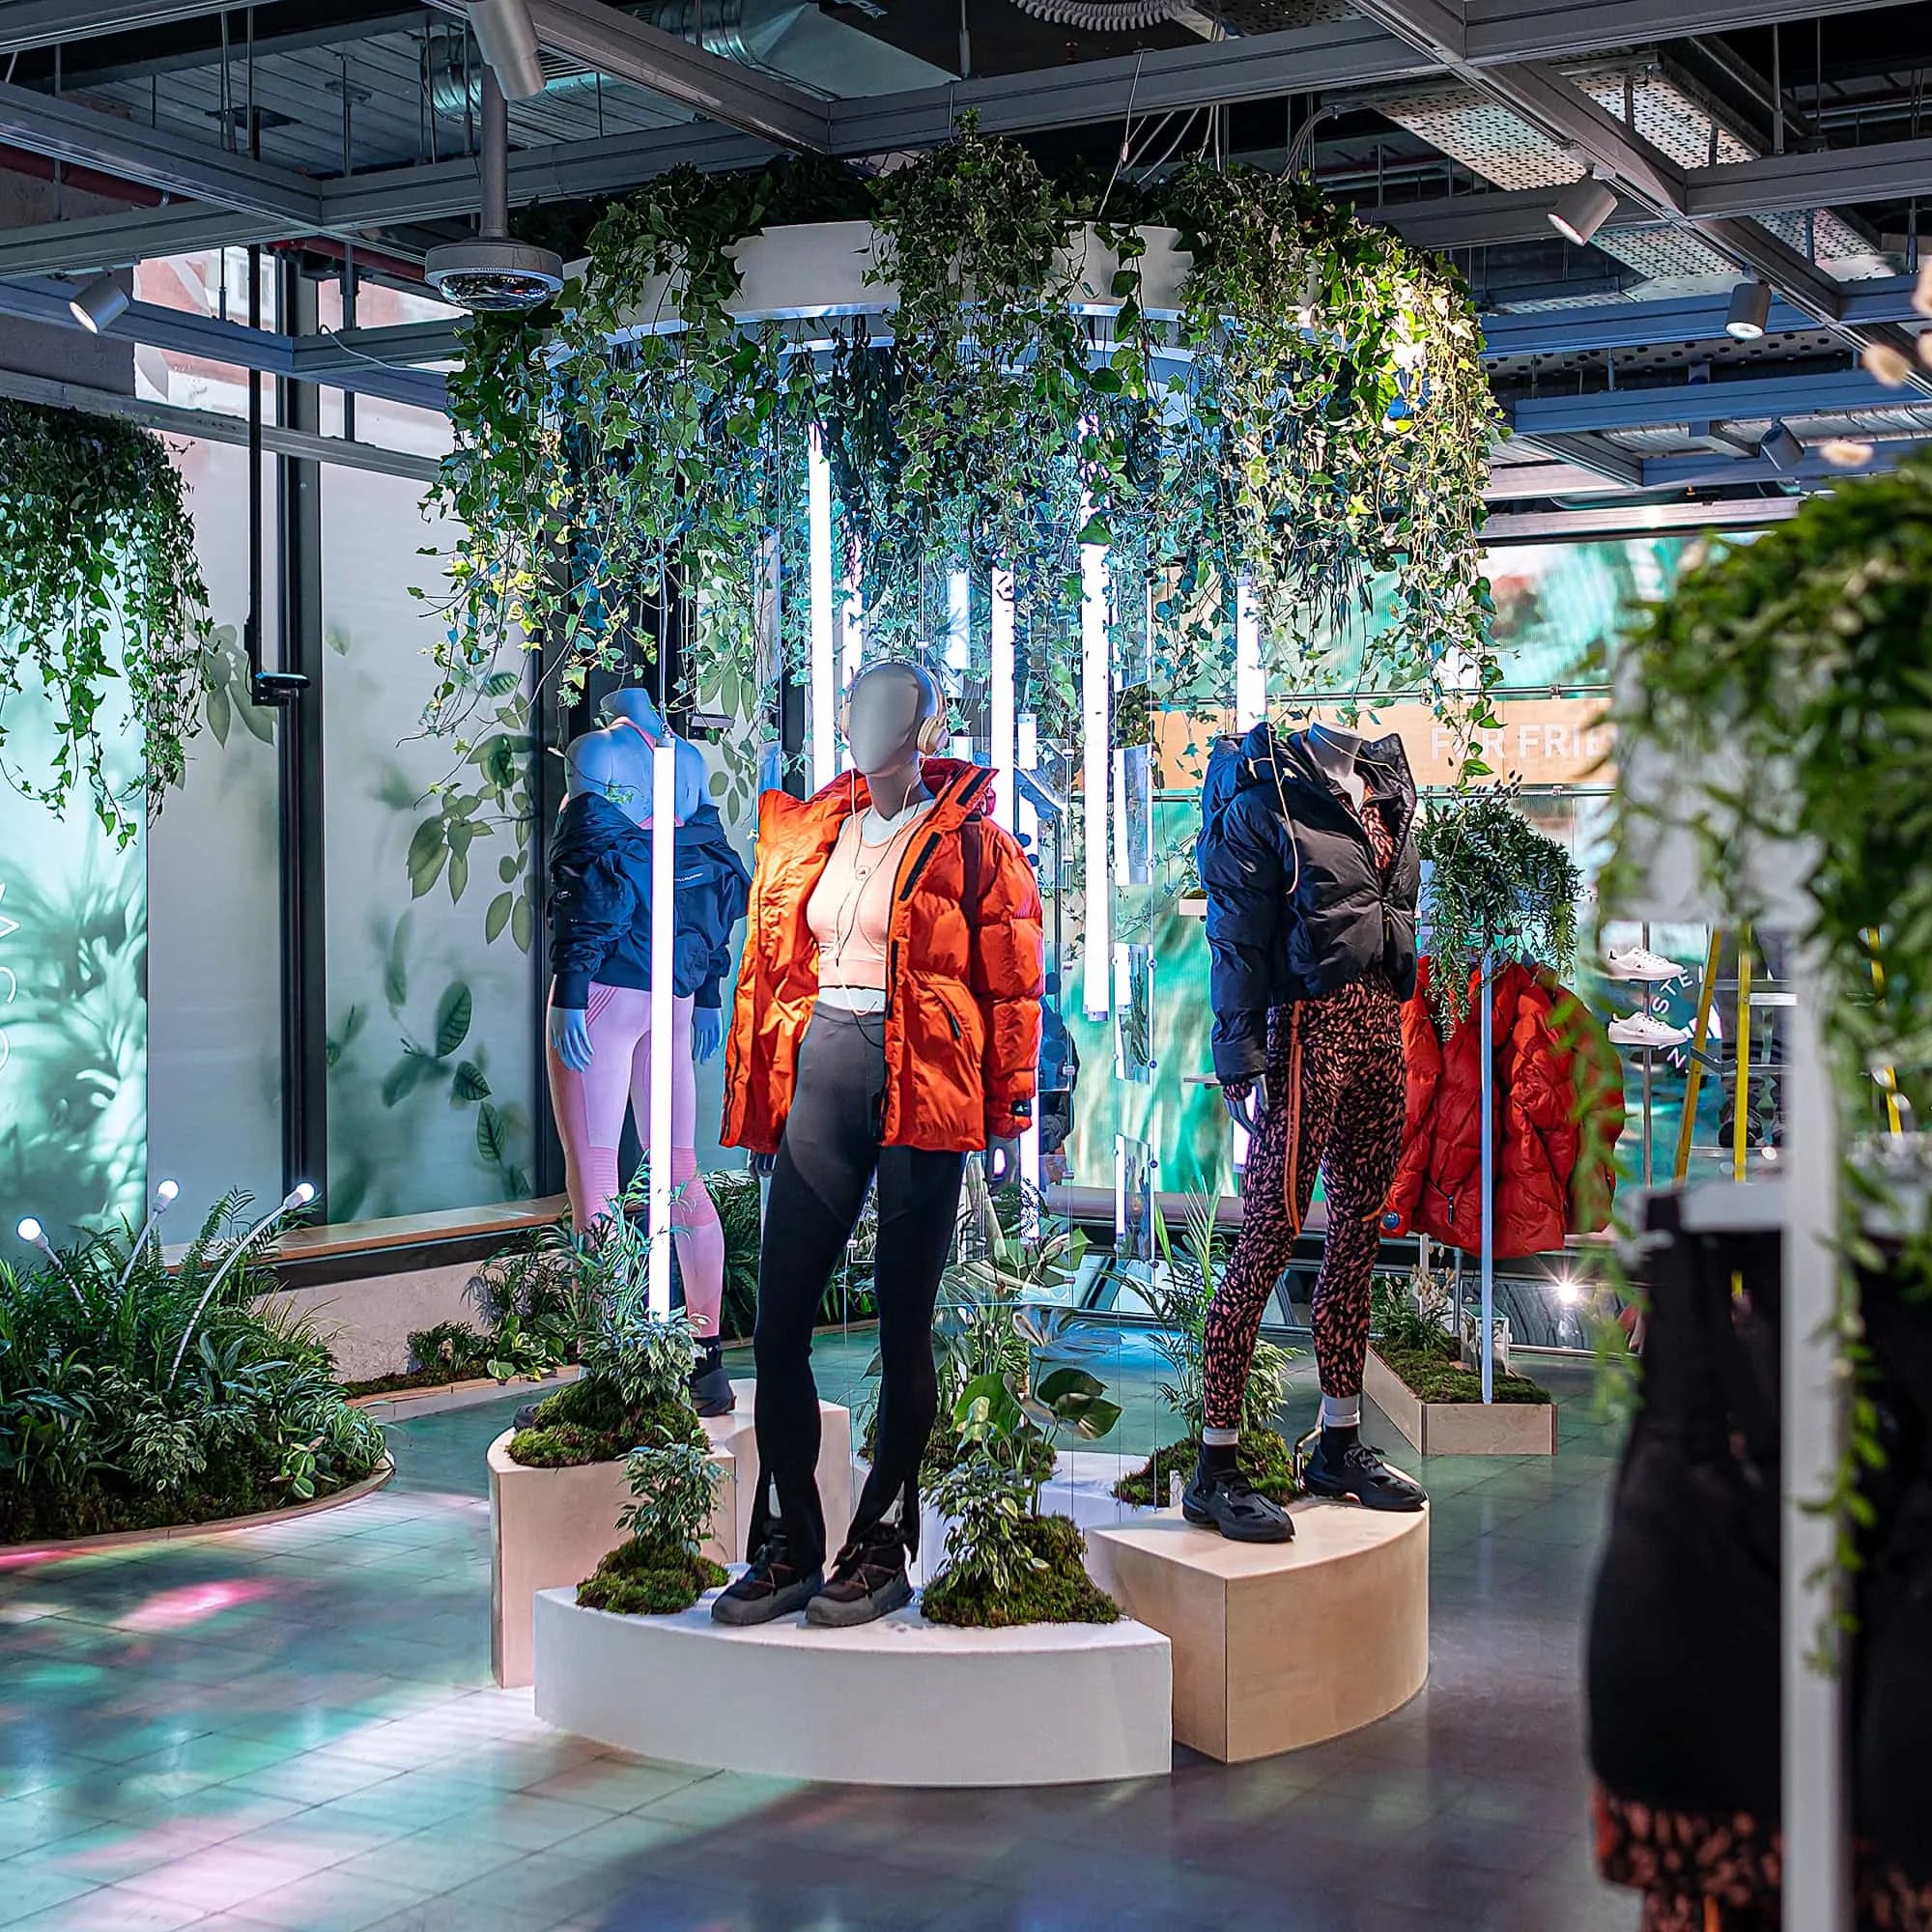 Bespoke Floral Installation for Adidas London store, plant installations by Amaranté London